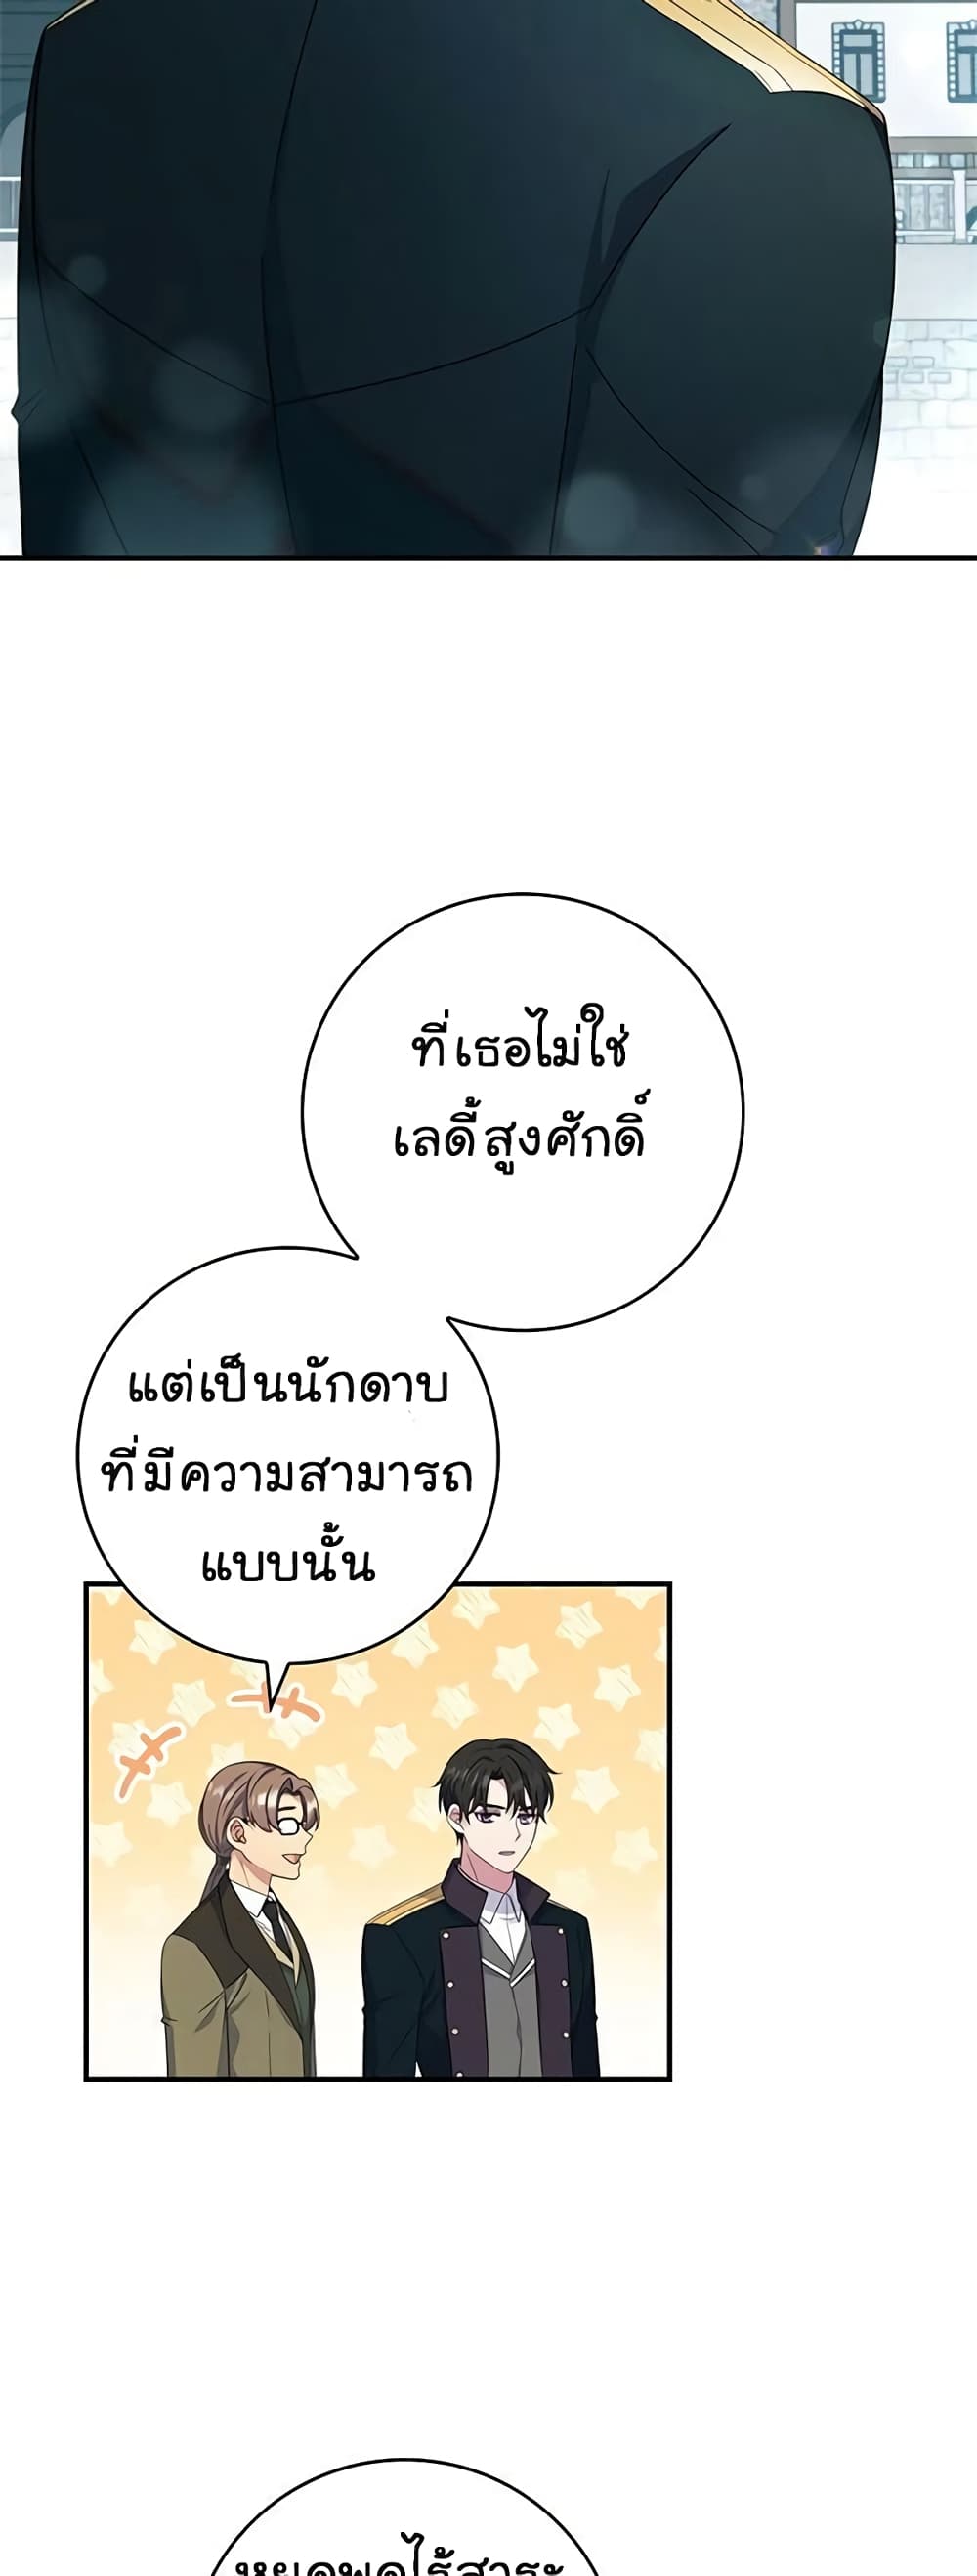 Fakes Don’t Want To Be Real ตอนที่ 7 (3)